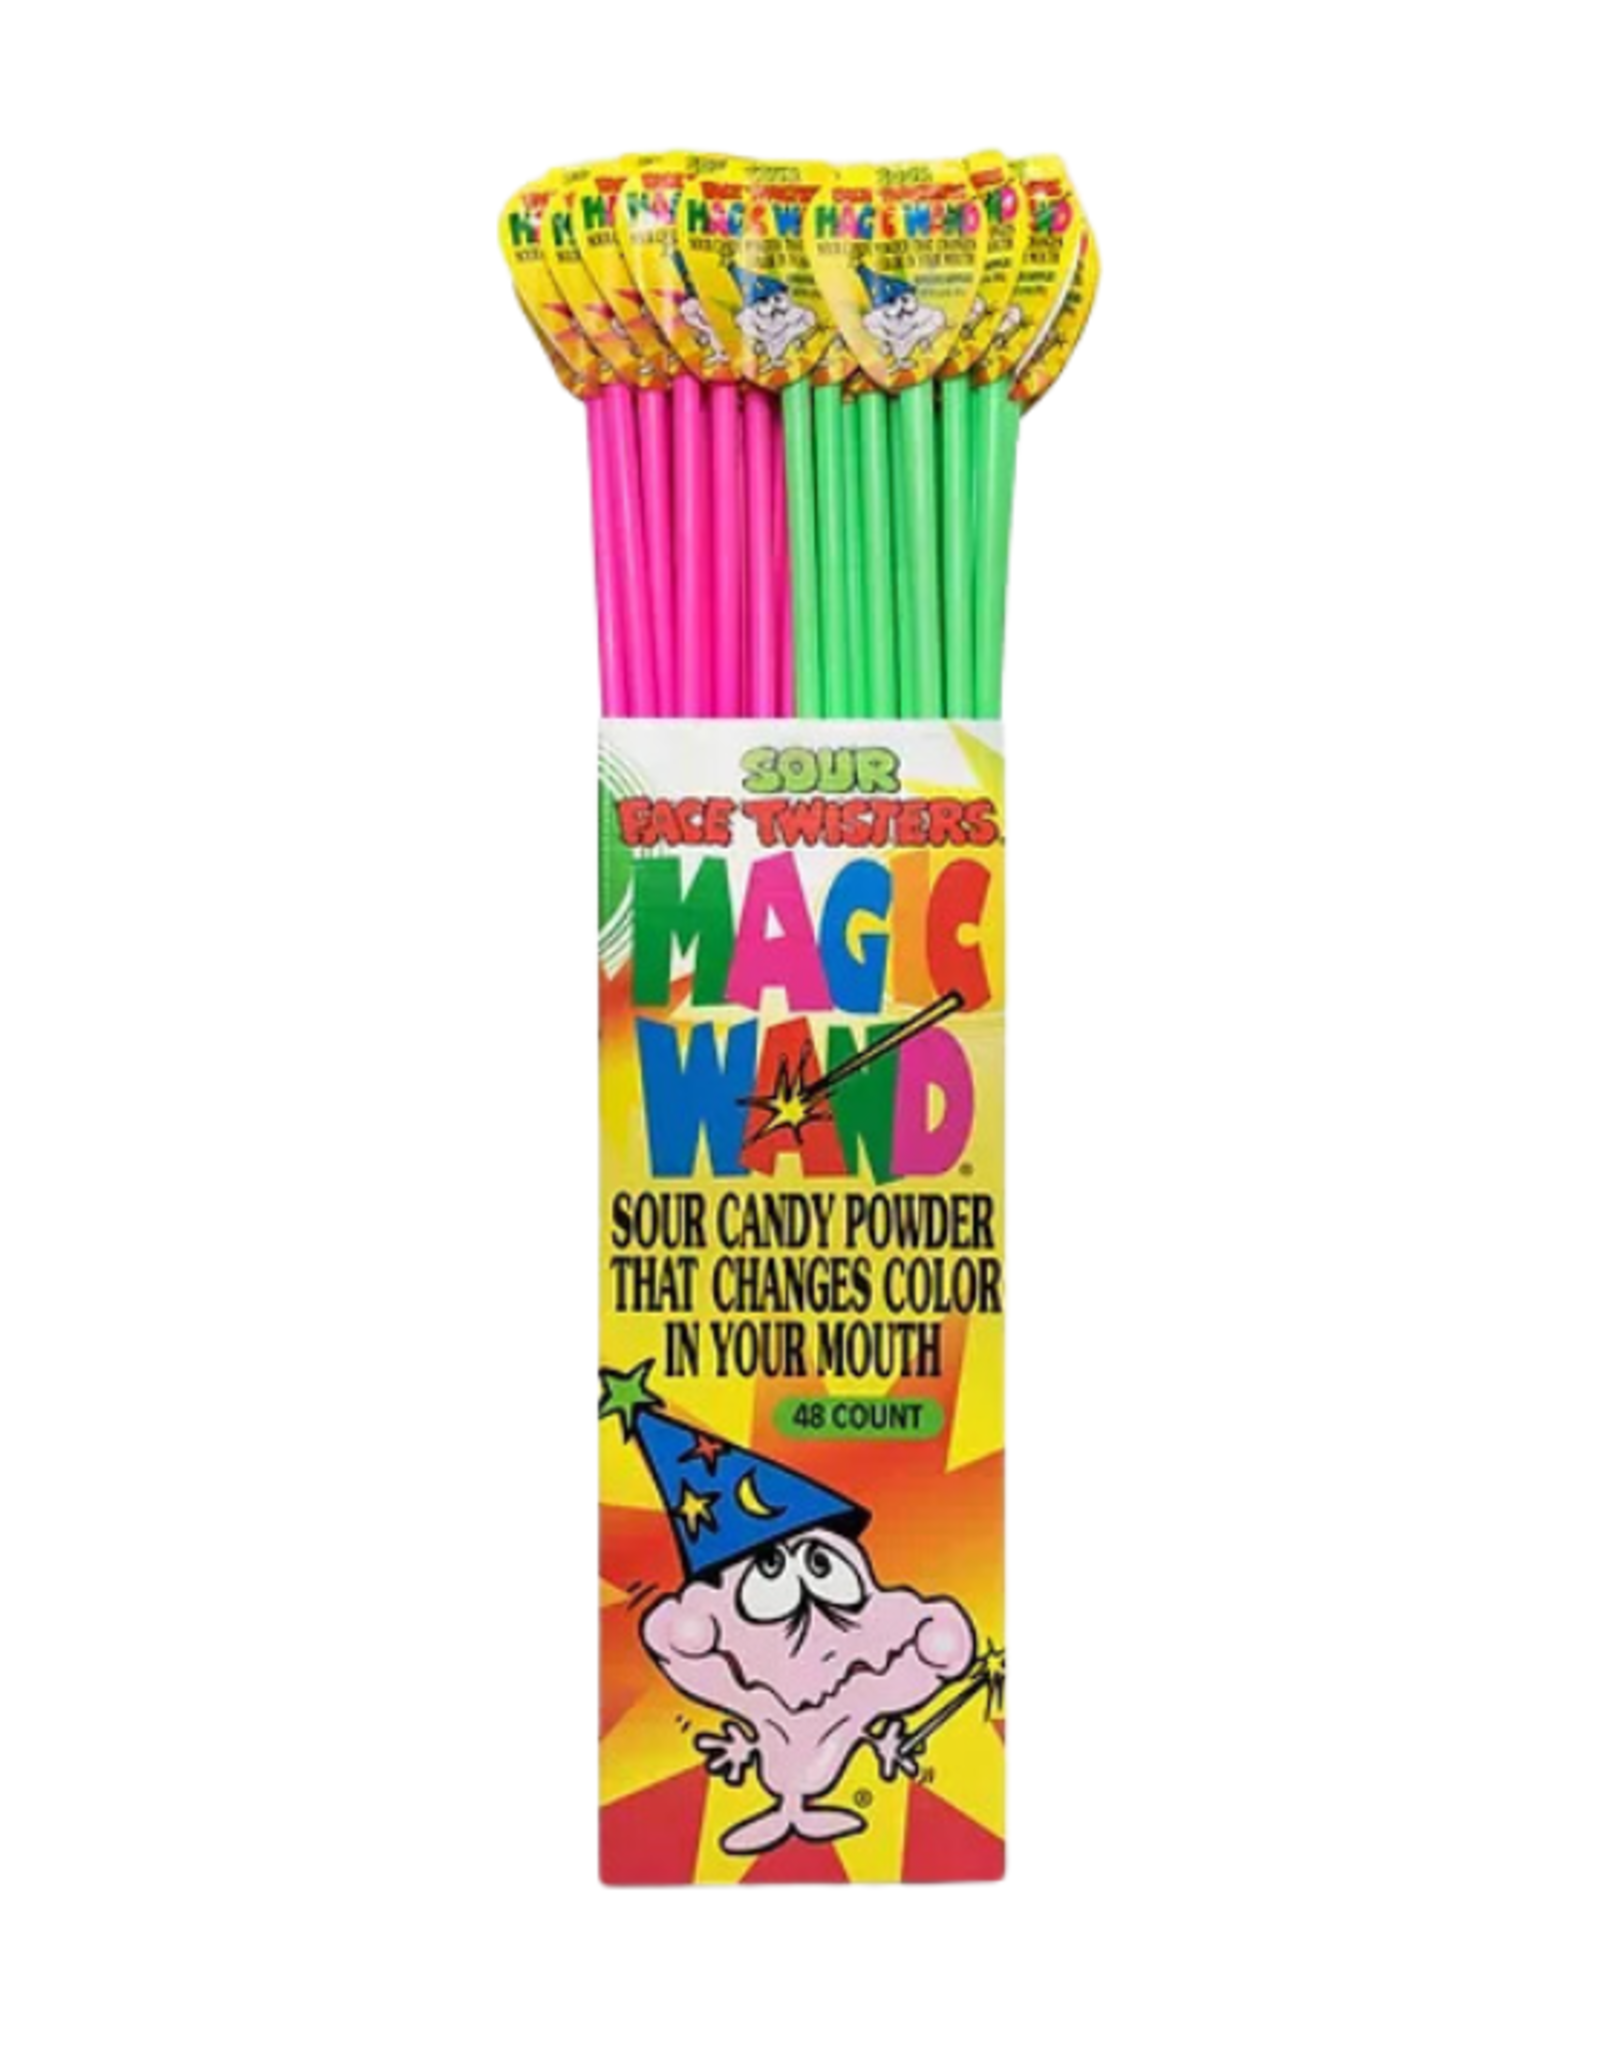 Jimmy Zee's Sour Face Twisters - Green Apple Magic Wand